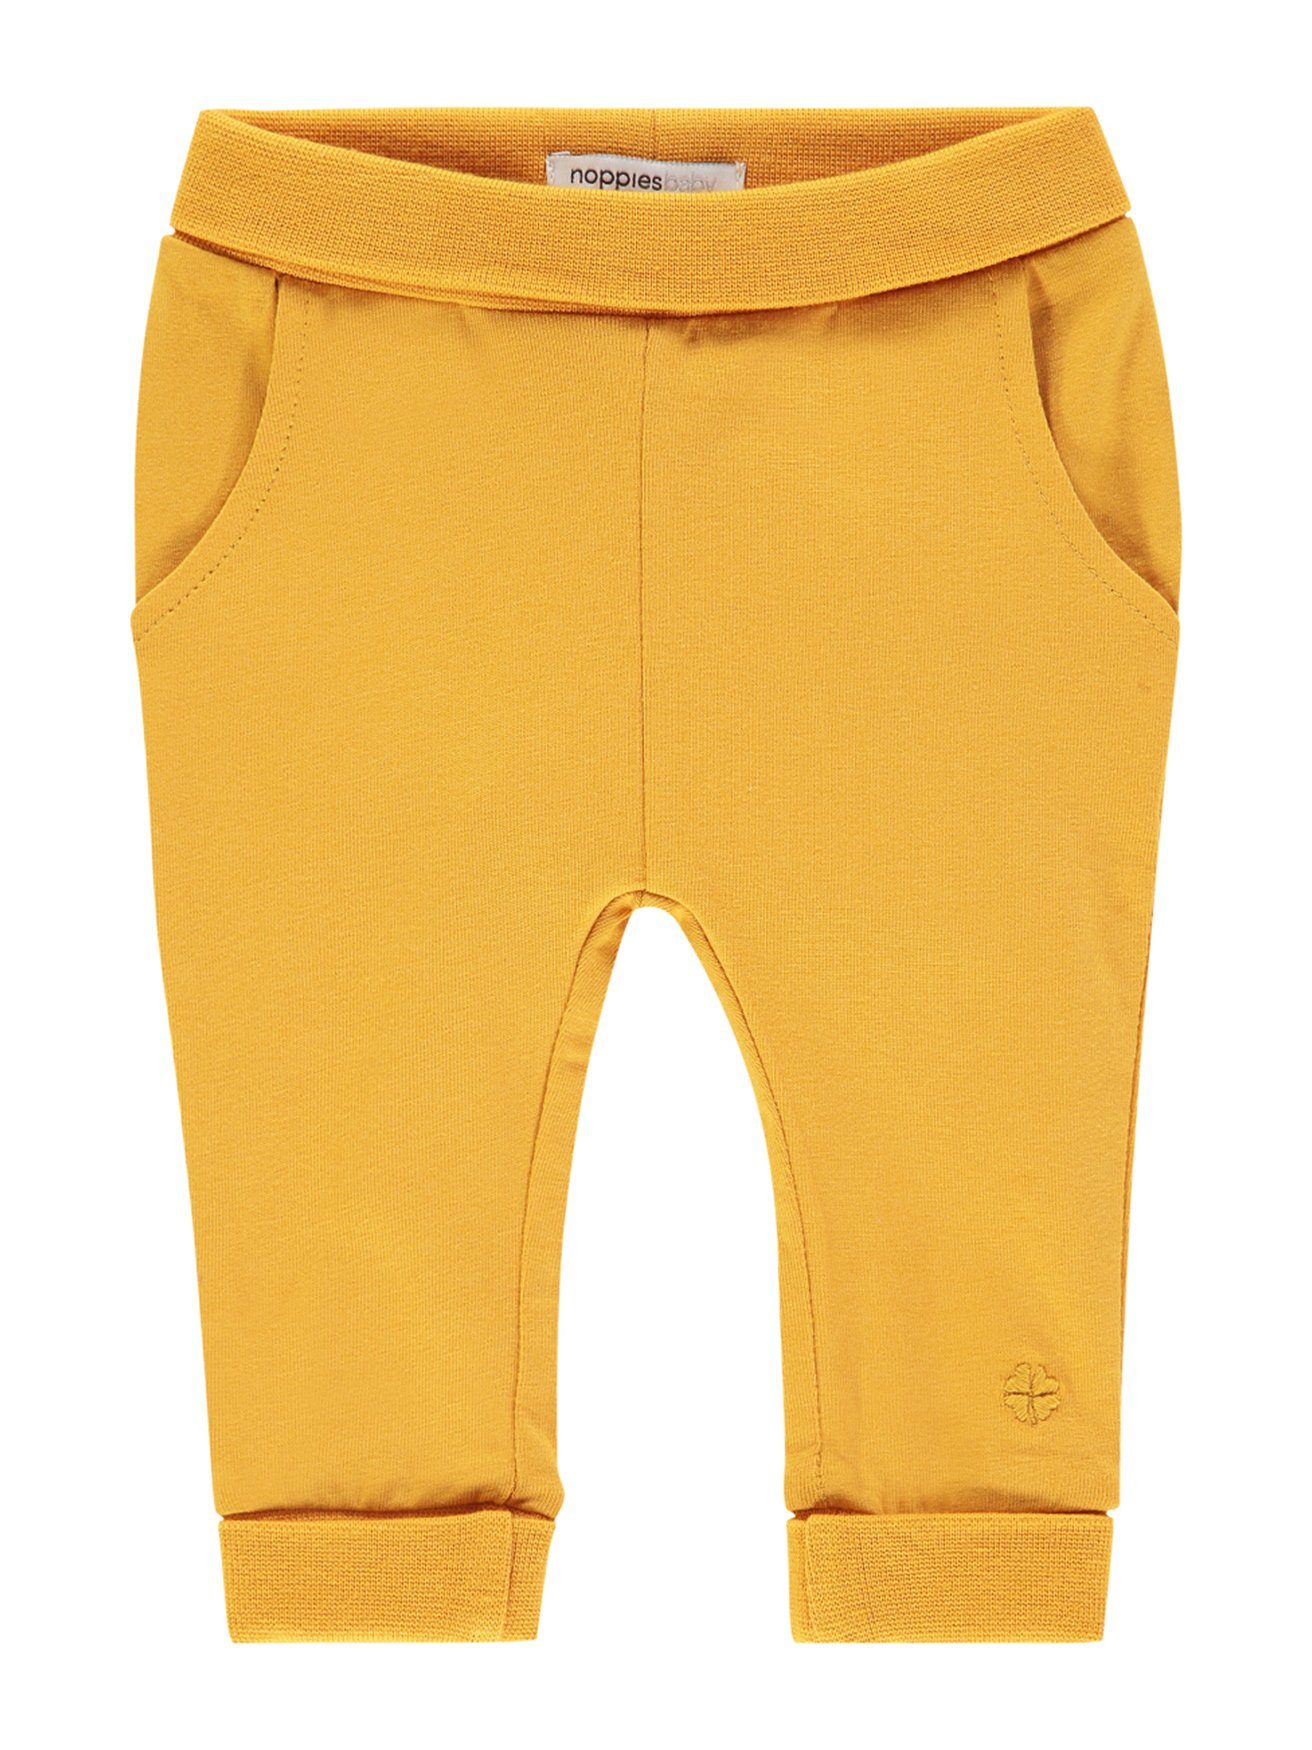 Soft Jersey Trousers - Mustard Yellow - Trousers / Leggings - Noppies